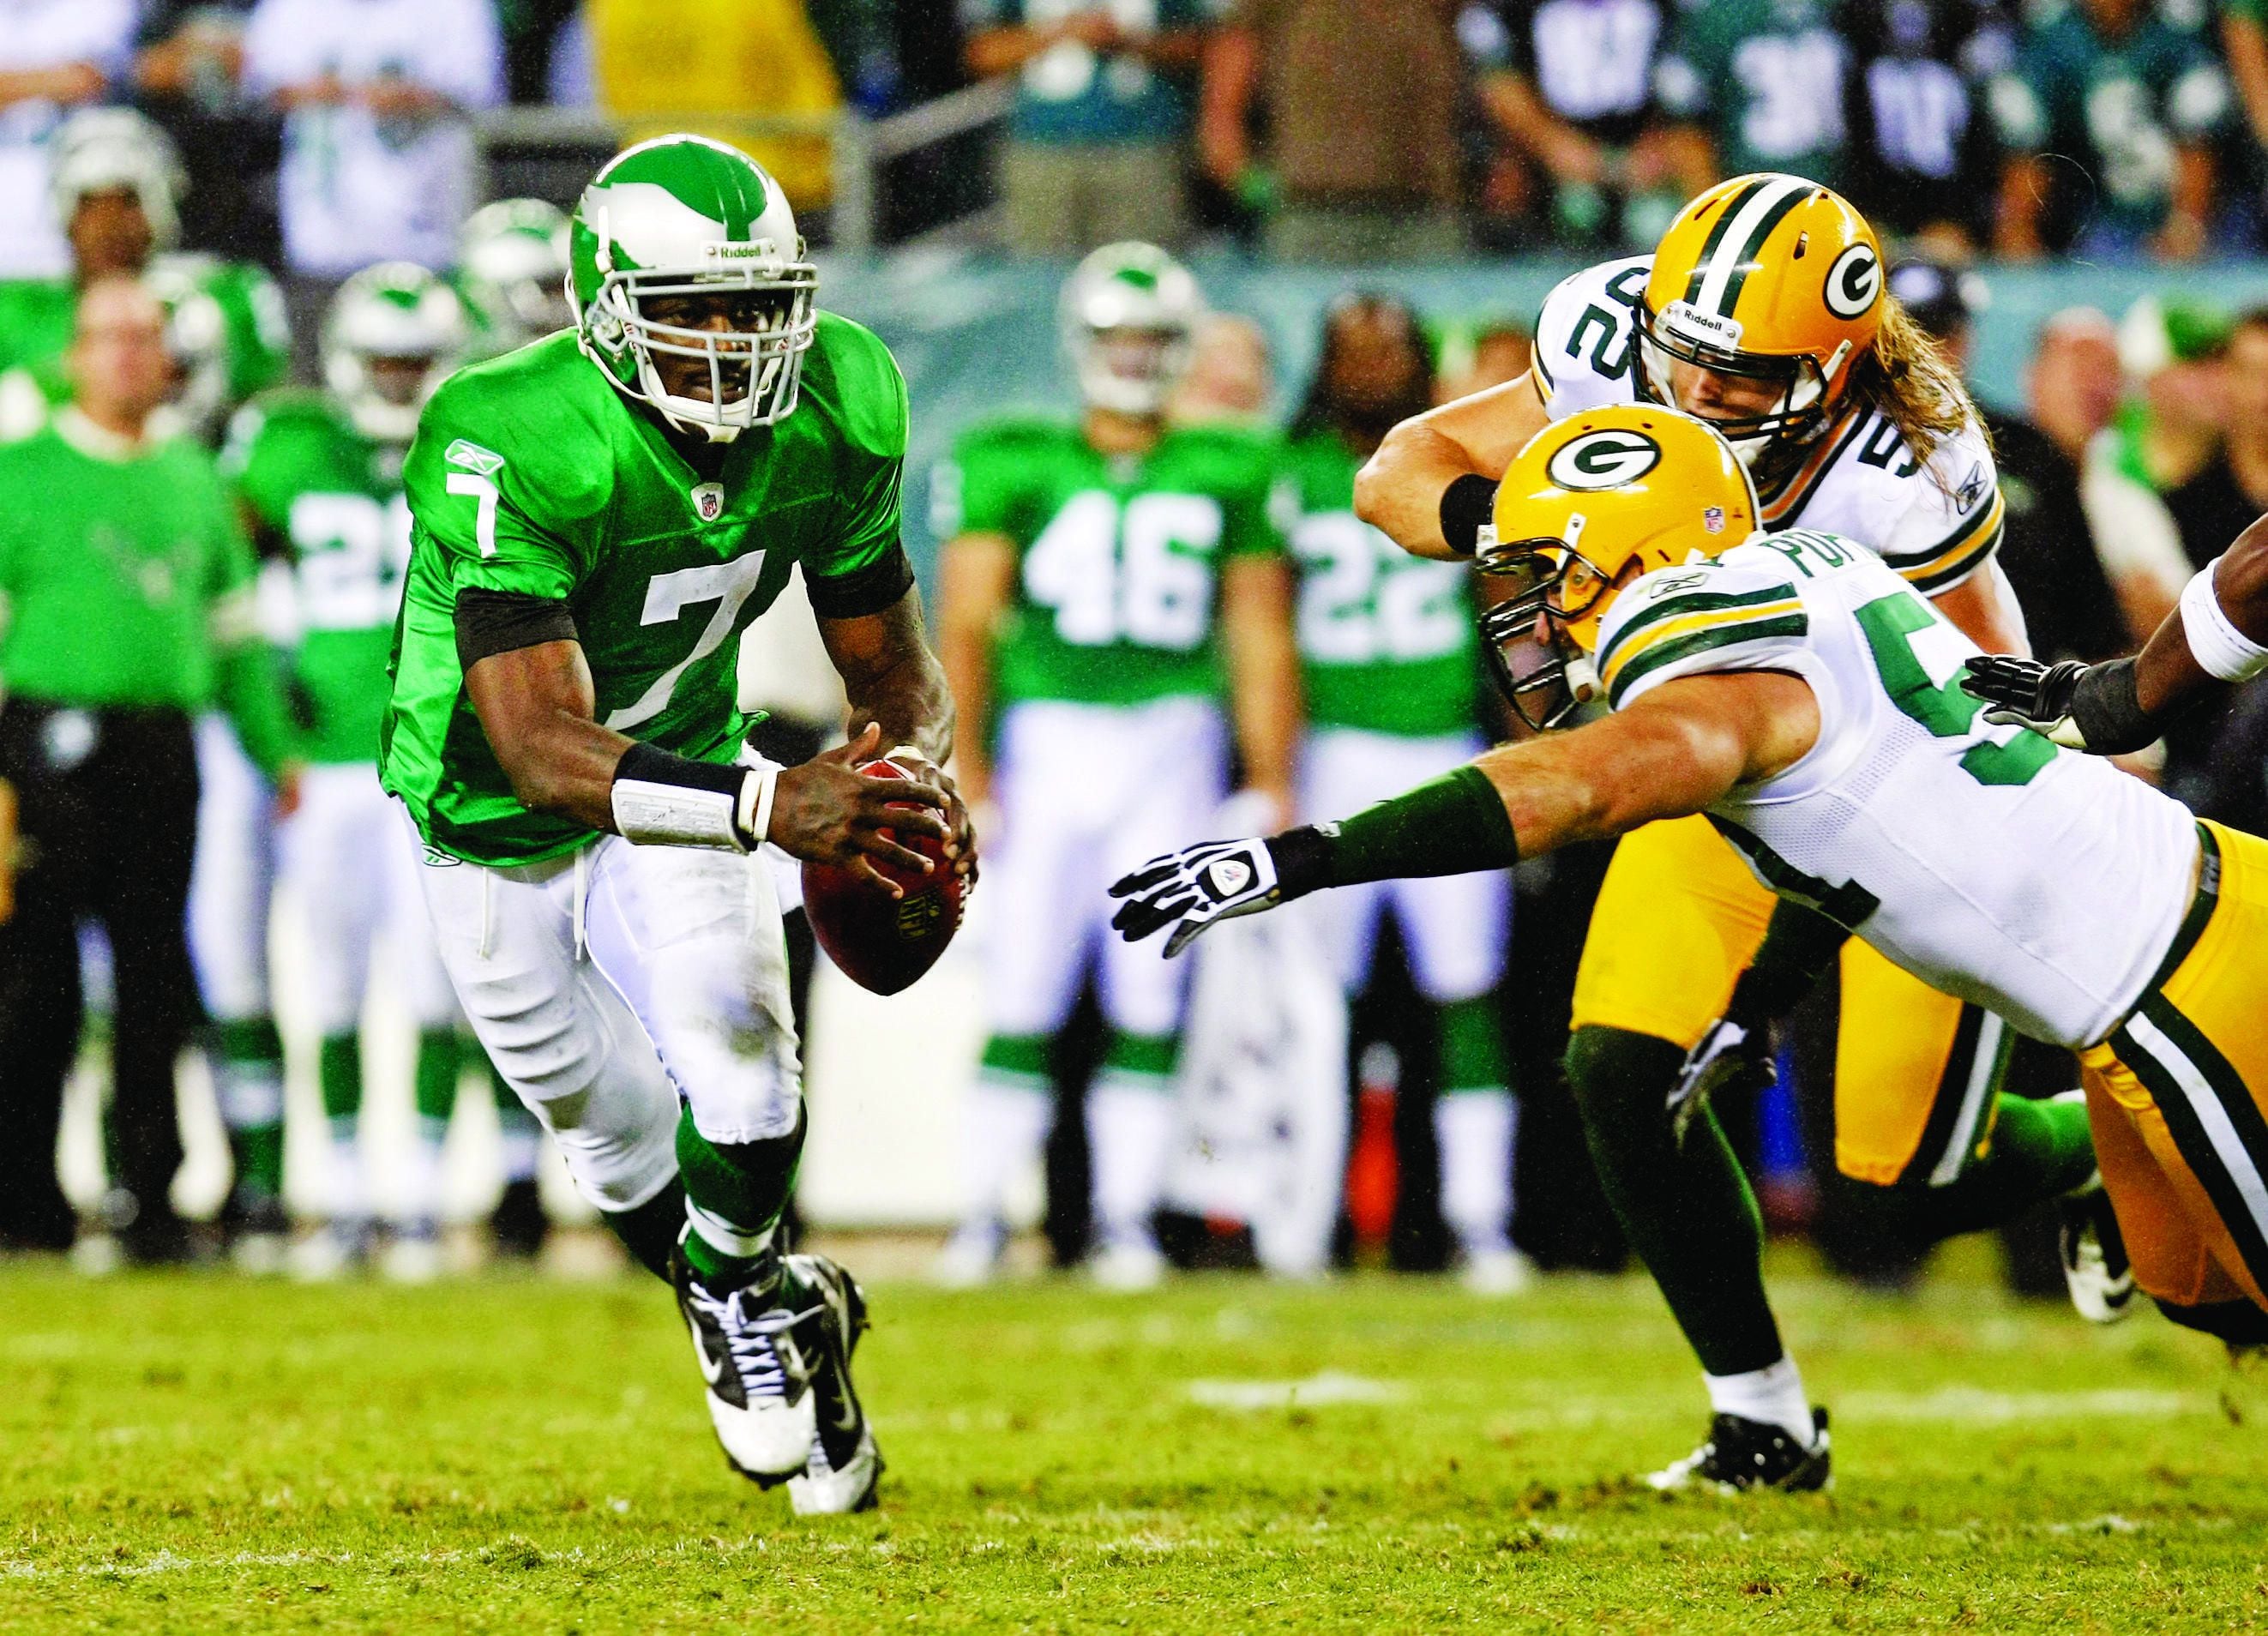 At last: Eagles will wear their old kelly green uniforms this